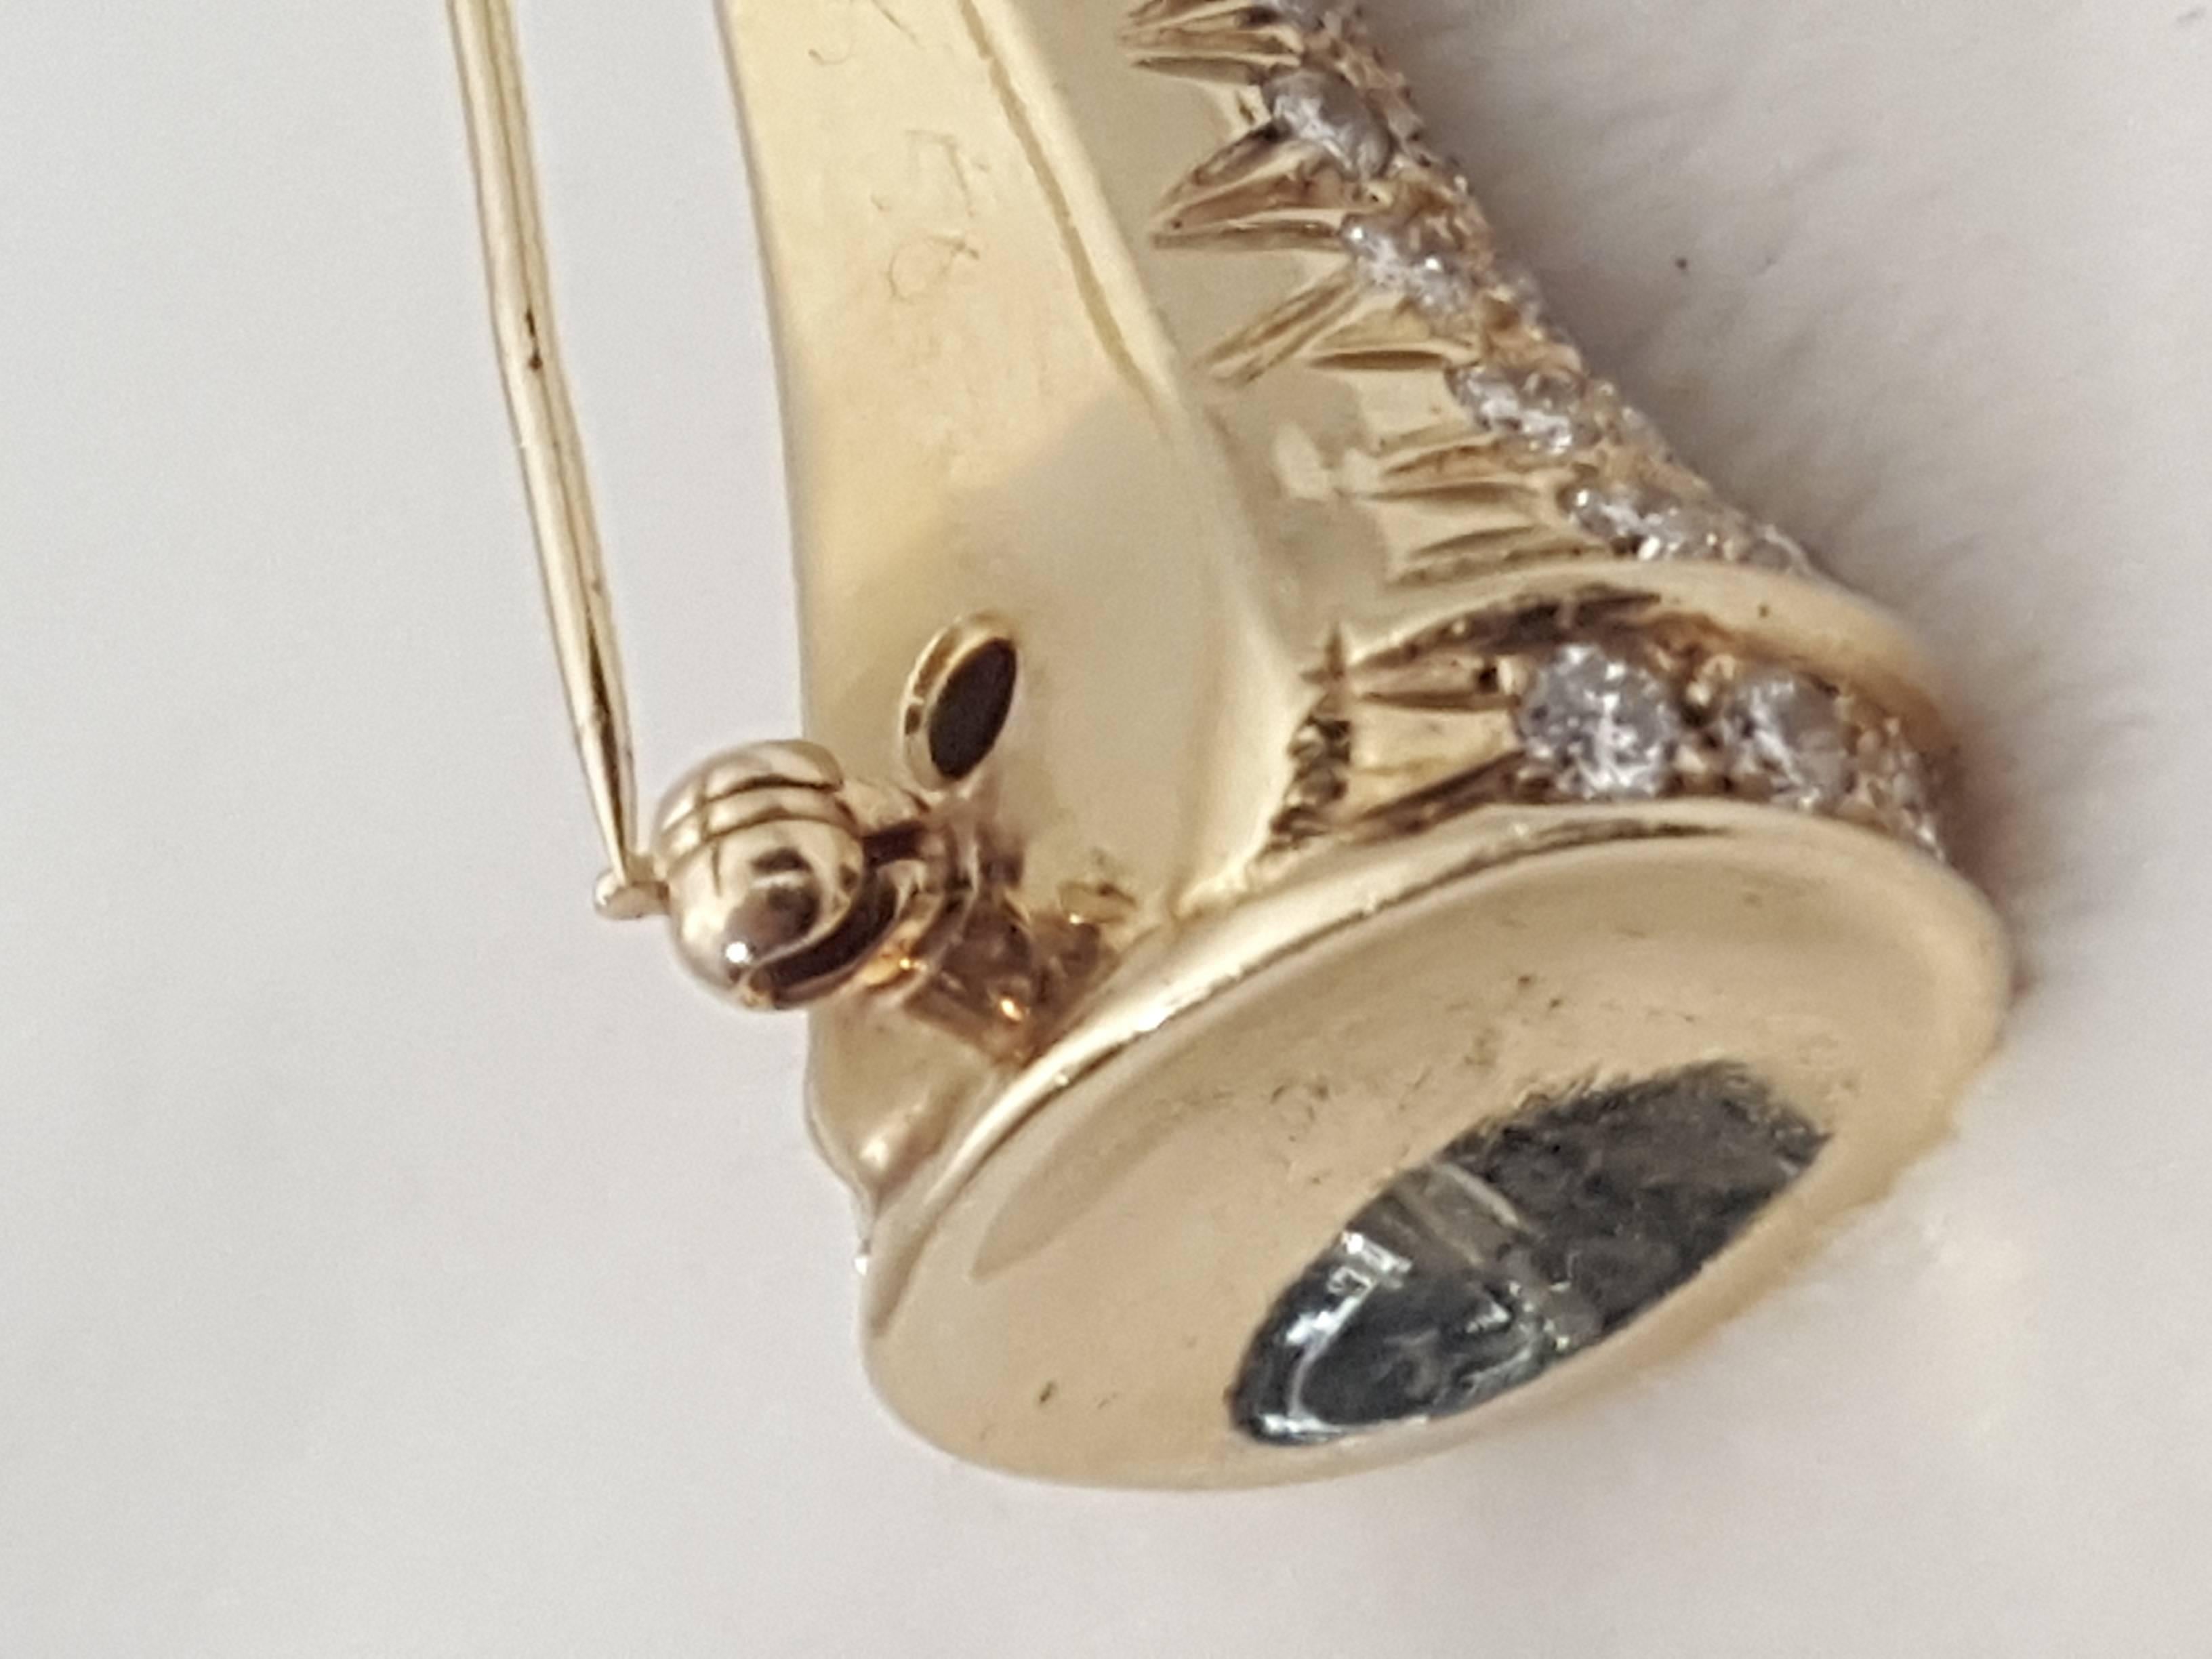 Better than a Green Jacket!  Lindsay & Co. manufactures such unique pieces! This Masters worthy golf tee brooch is encrusted in round white diamonds is meticulously crafted in 18 karat yellow gold.  Pointed end is high polish, curved high polish top